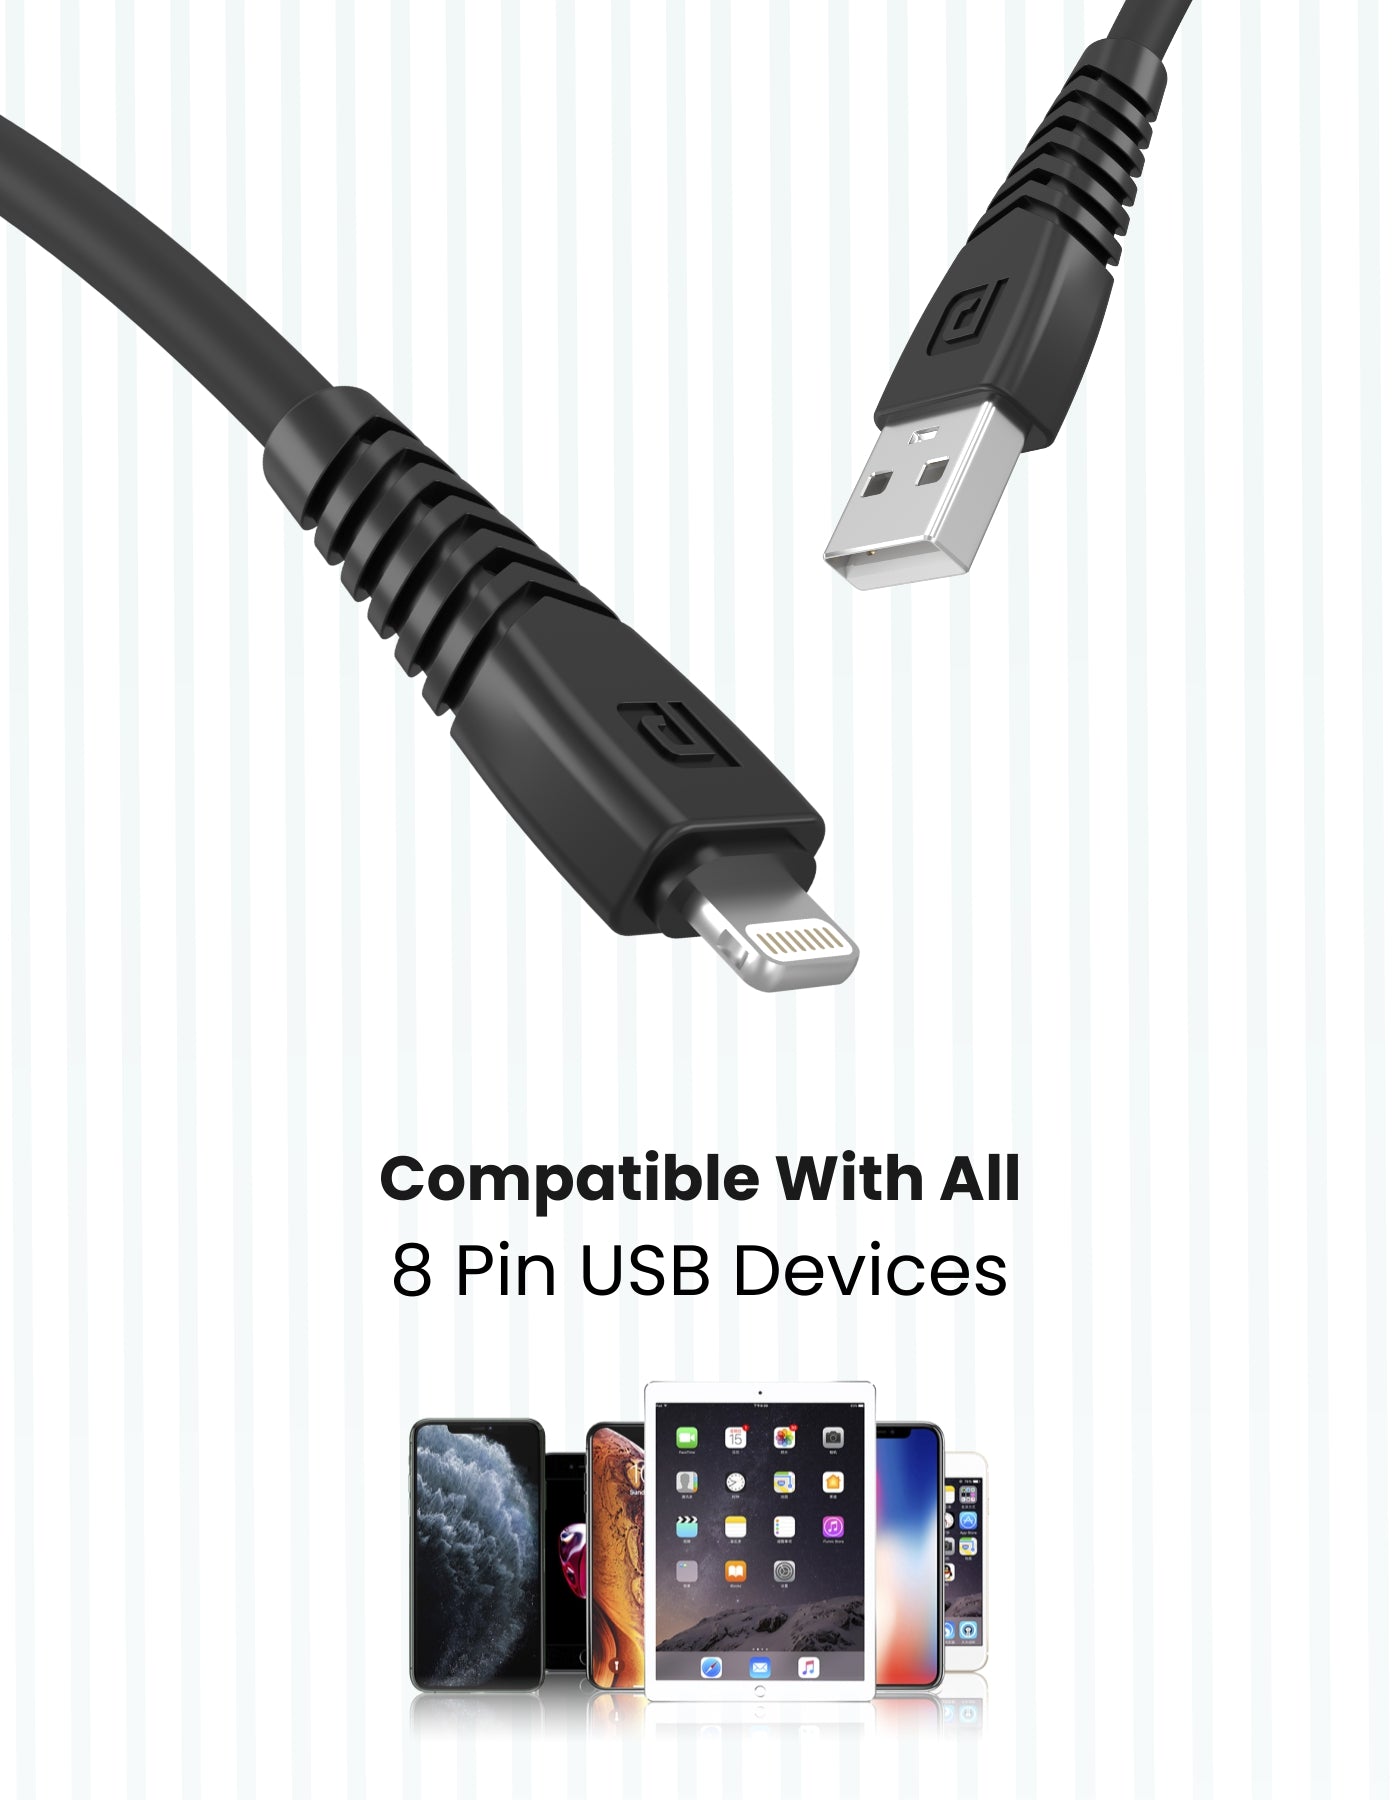 Portronics Konnect Core 8 Pin  USB Cable | USB Charging Cable compatible with all 8 pin enable devices